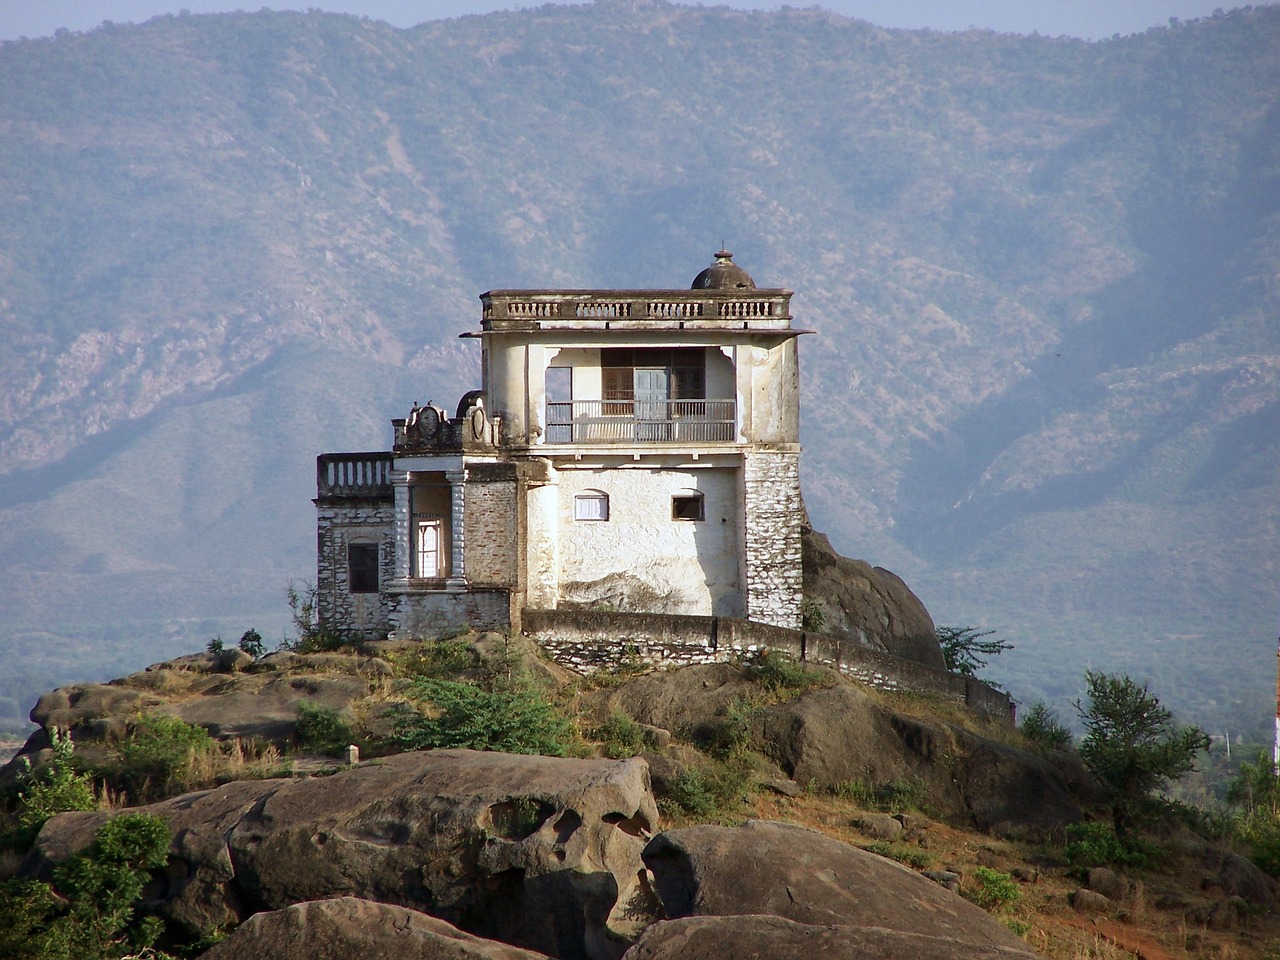 Mount Abu Day Trip: Hiking, Sightseeing, and Local Cuisine